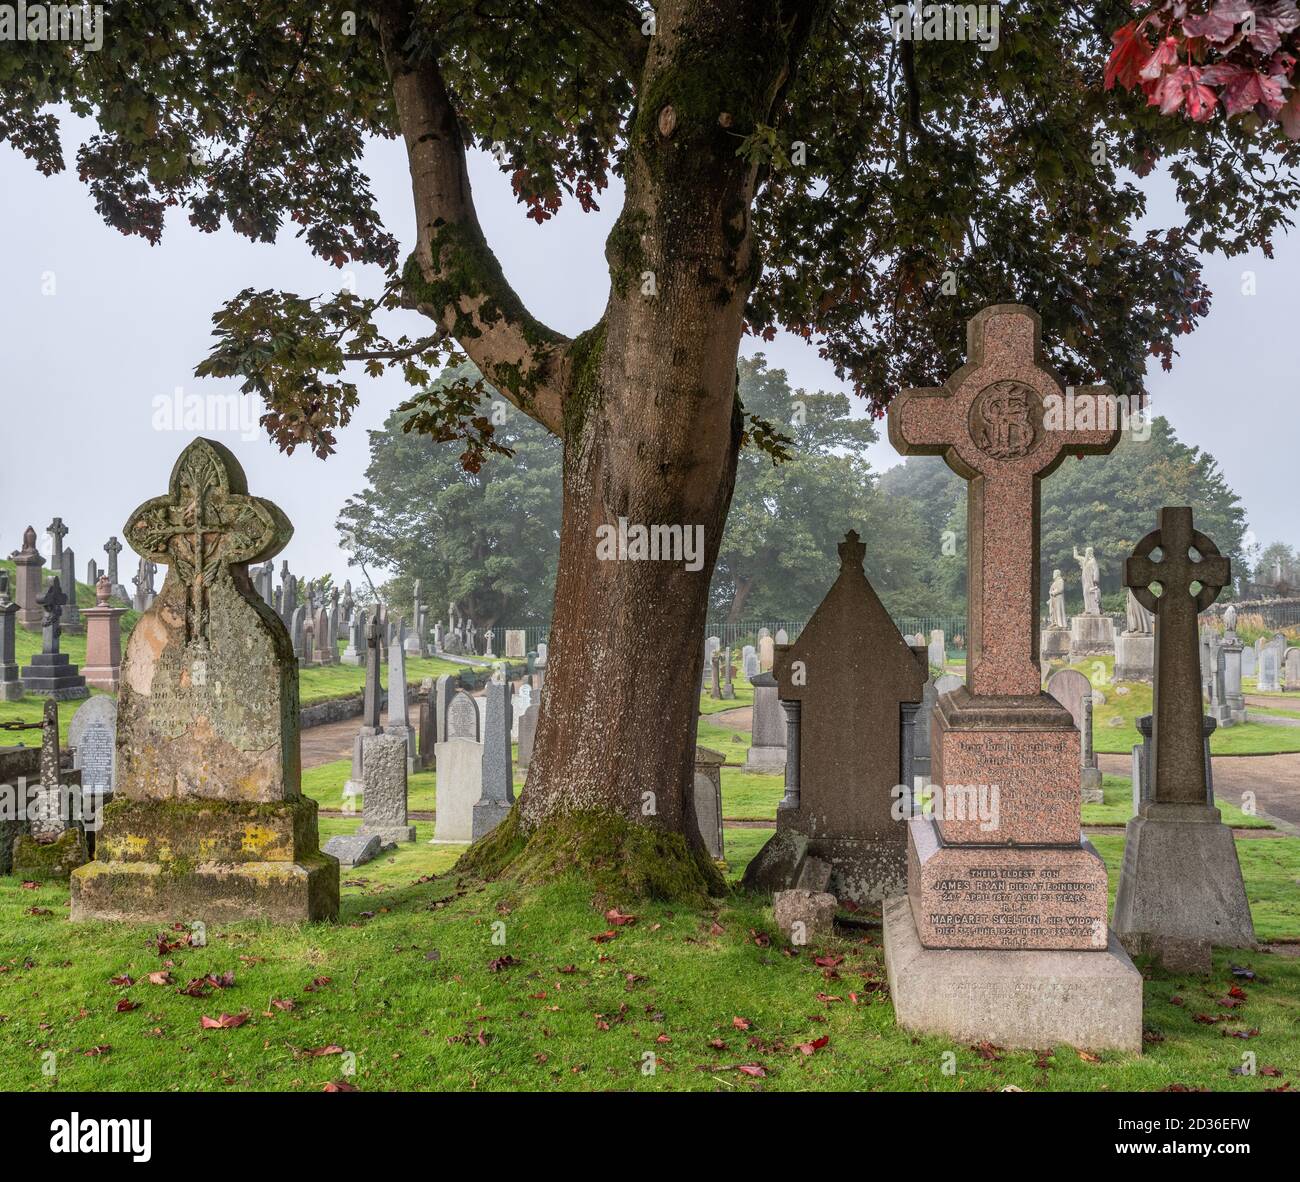 Scotland, Stirling, 02/10/2020 - Old Town Cemetery with head stones and statues. Stock Photo